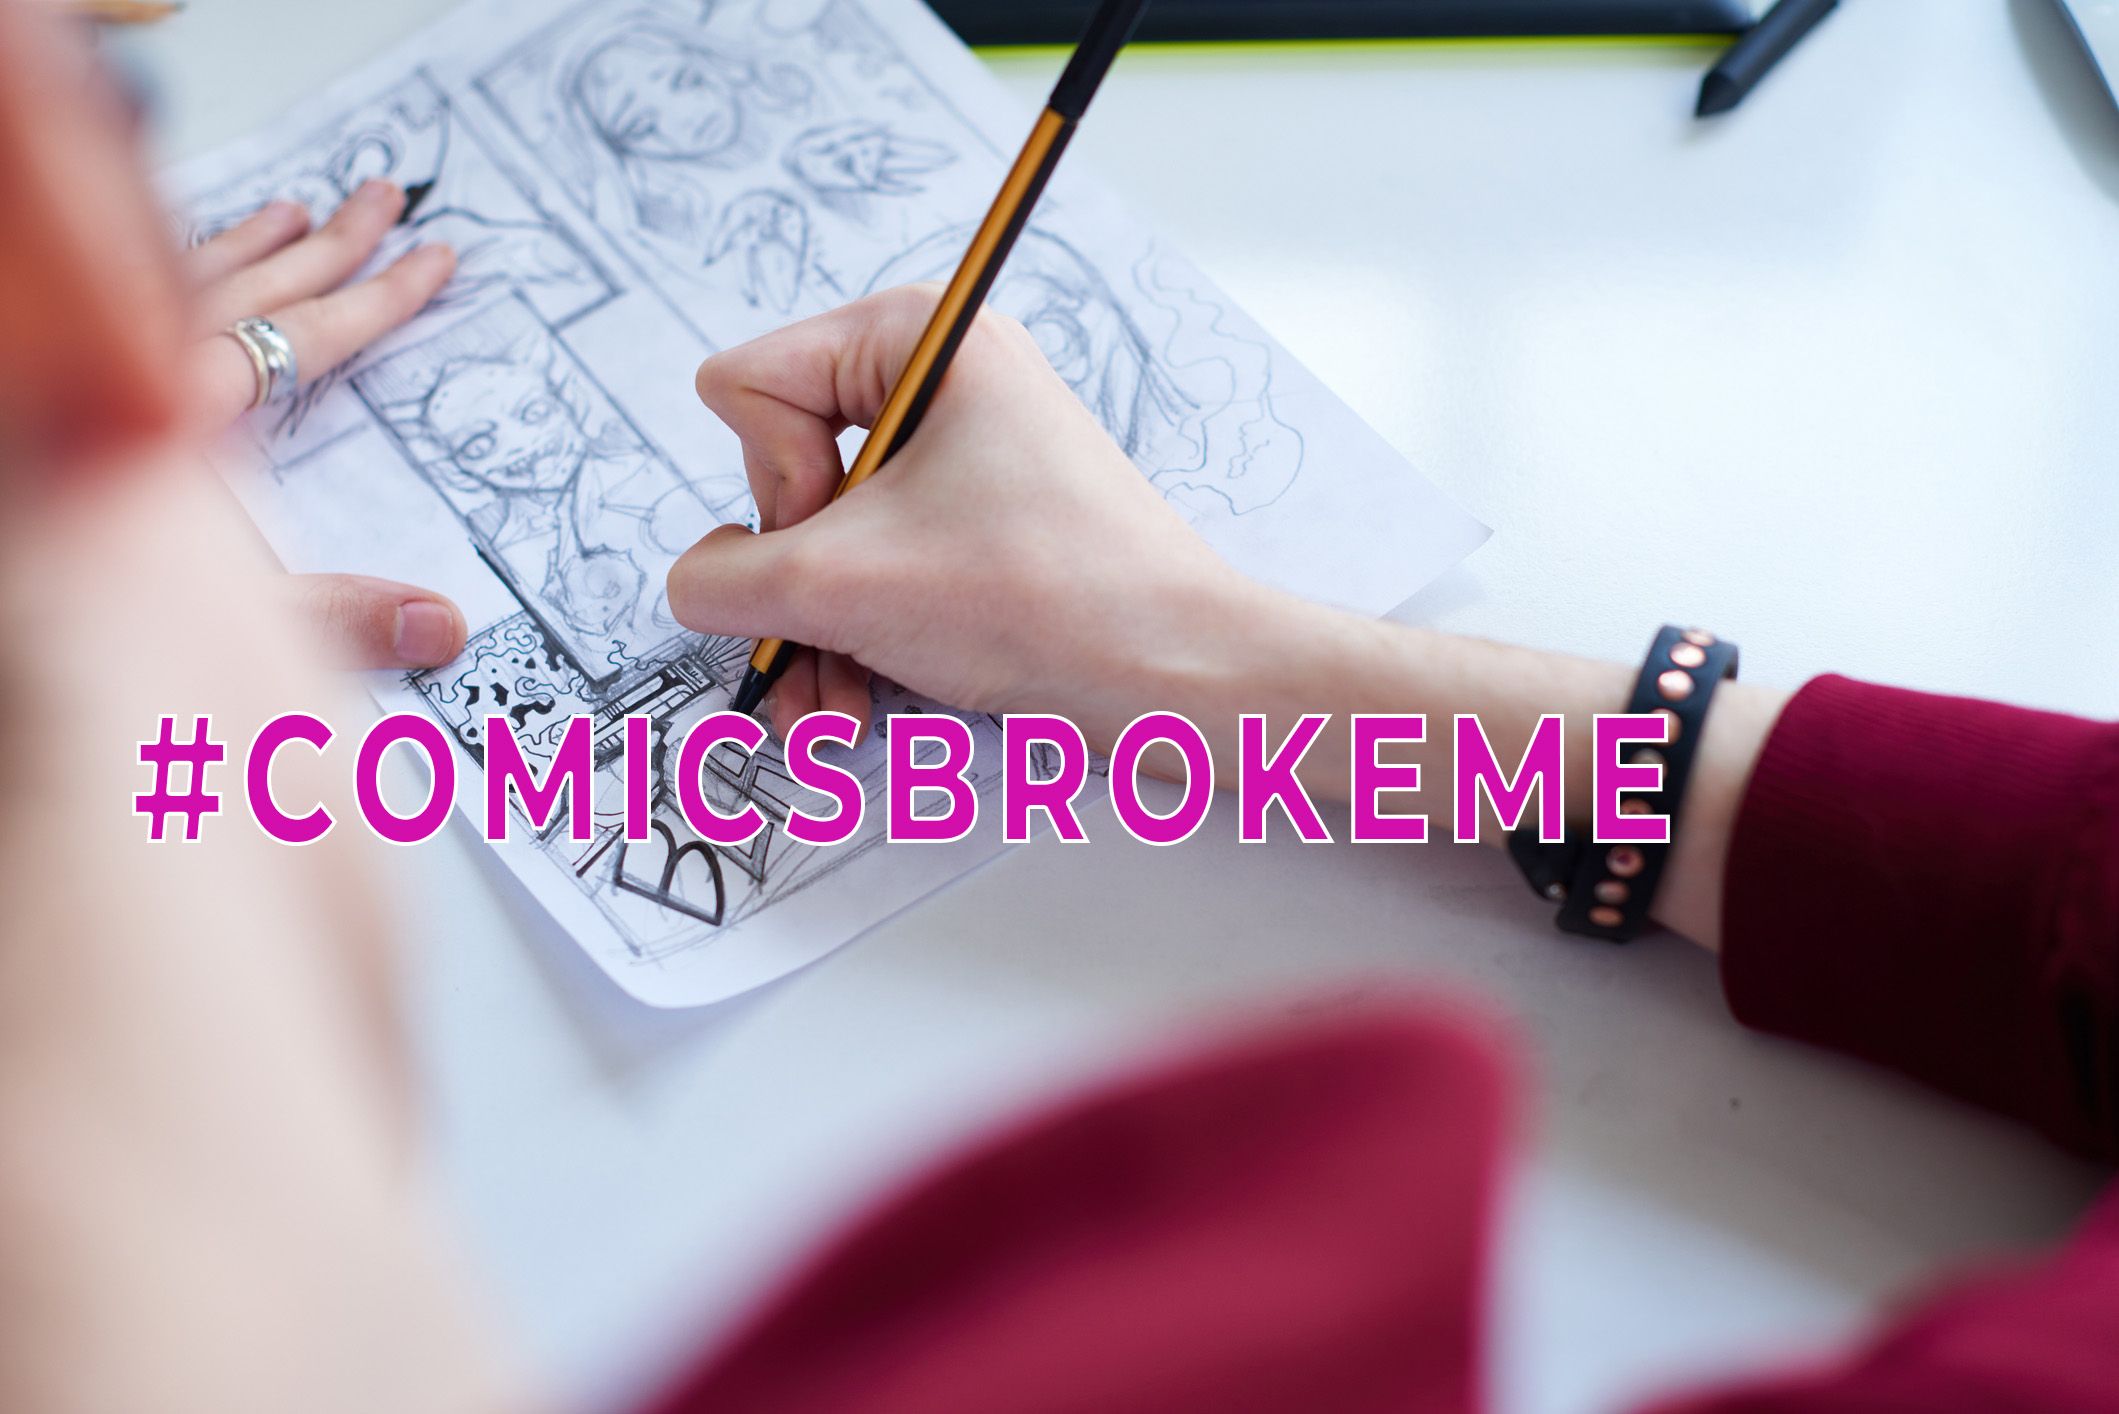 #ComicsBrokeMe trends on Twitter sparking frustrations with the comics industry